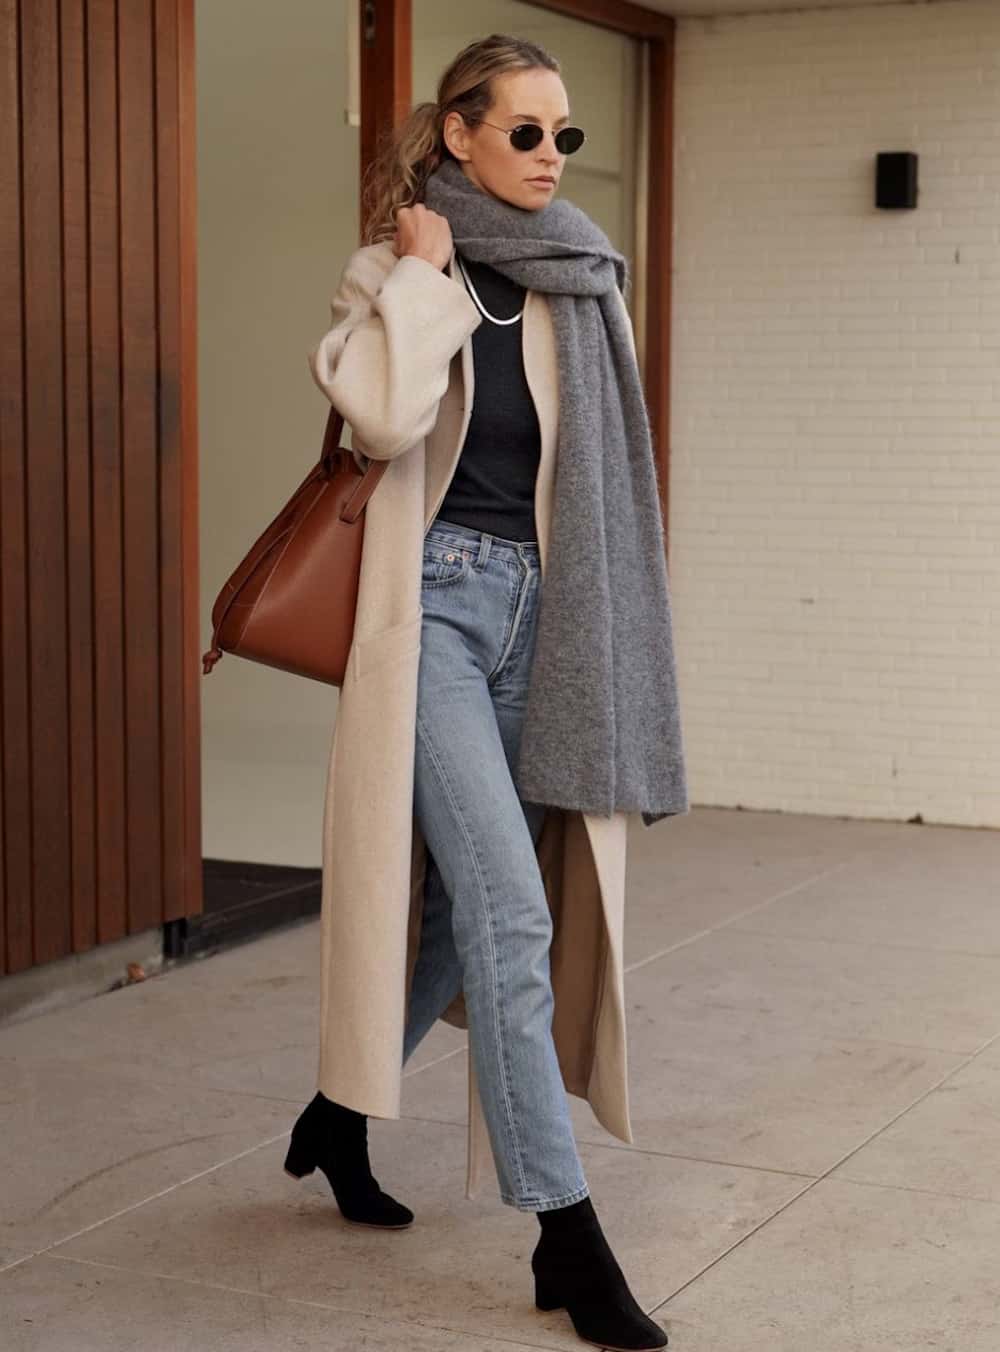 image of a woman in a long wool beige coat, jeans, and black ankle boots